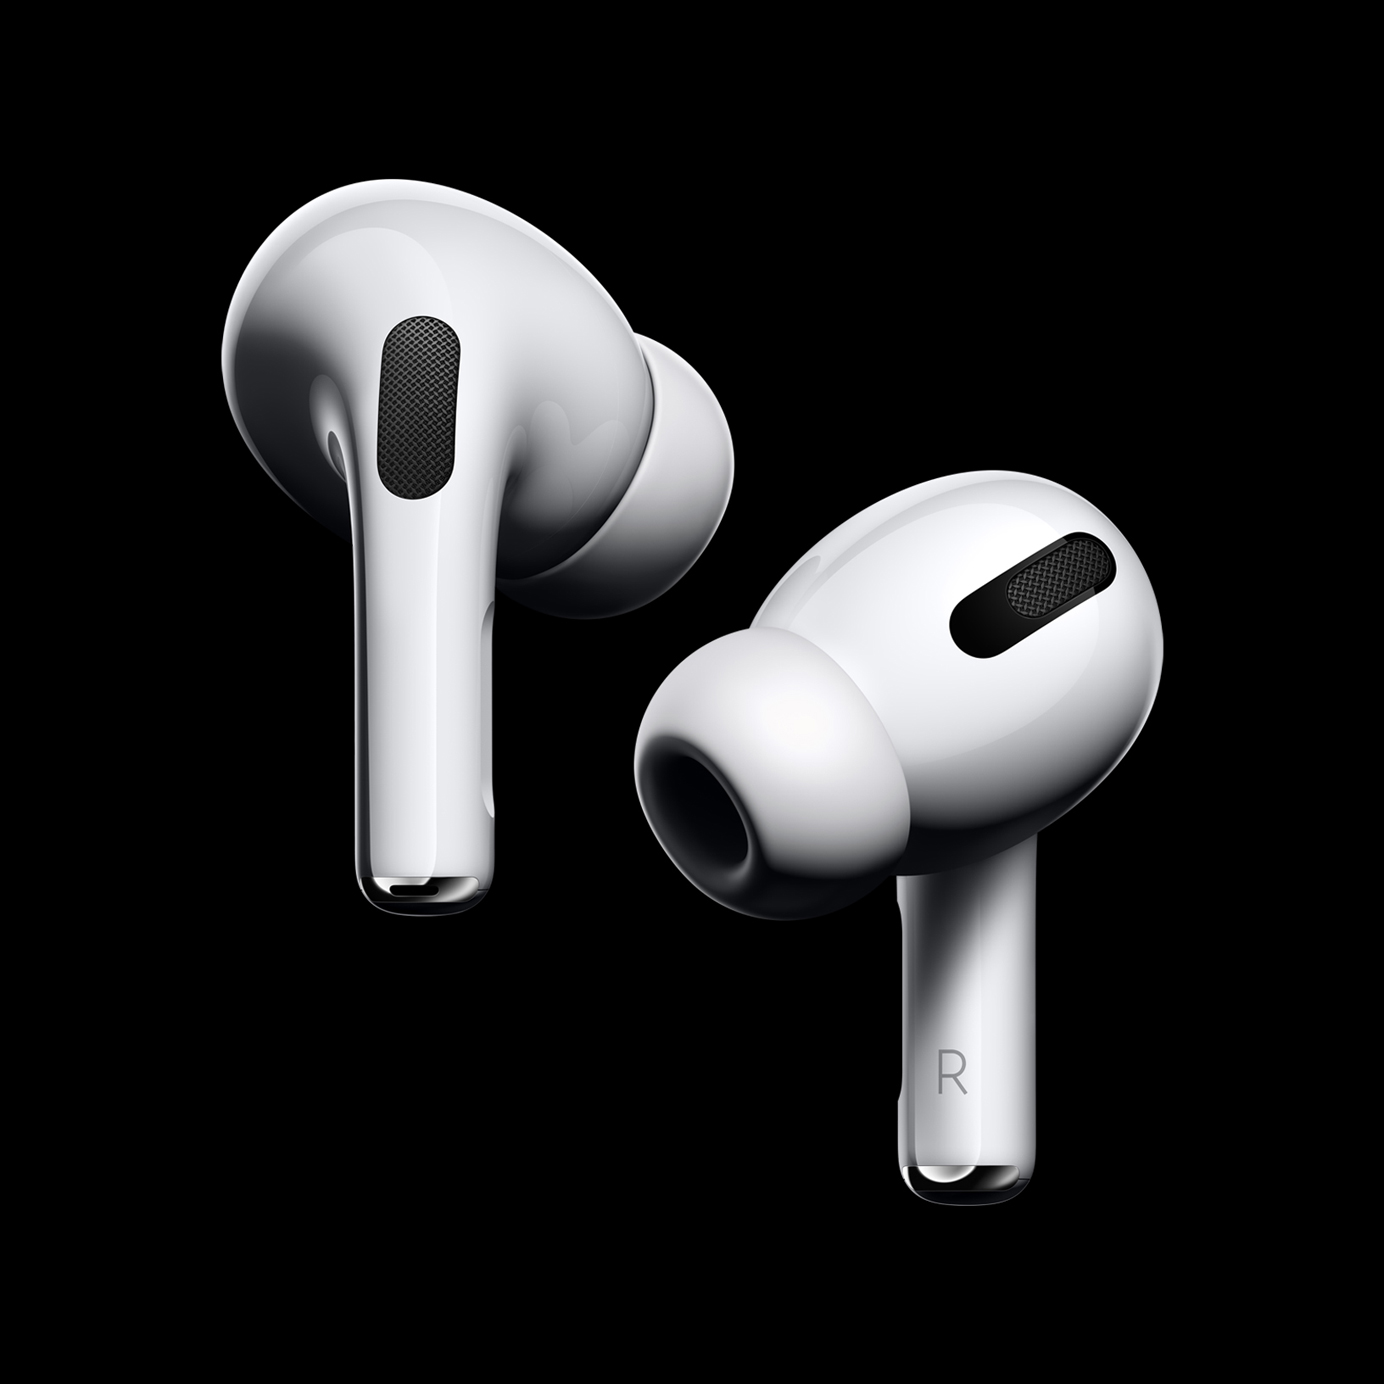 Apple's new AirPods Pro coming Wednesday for $249